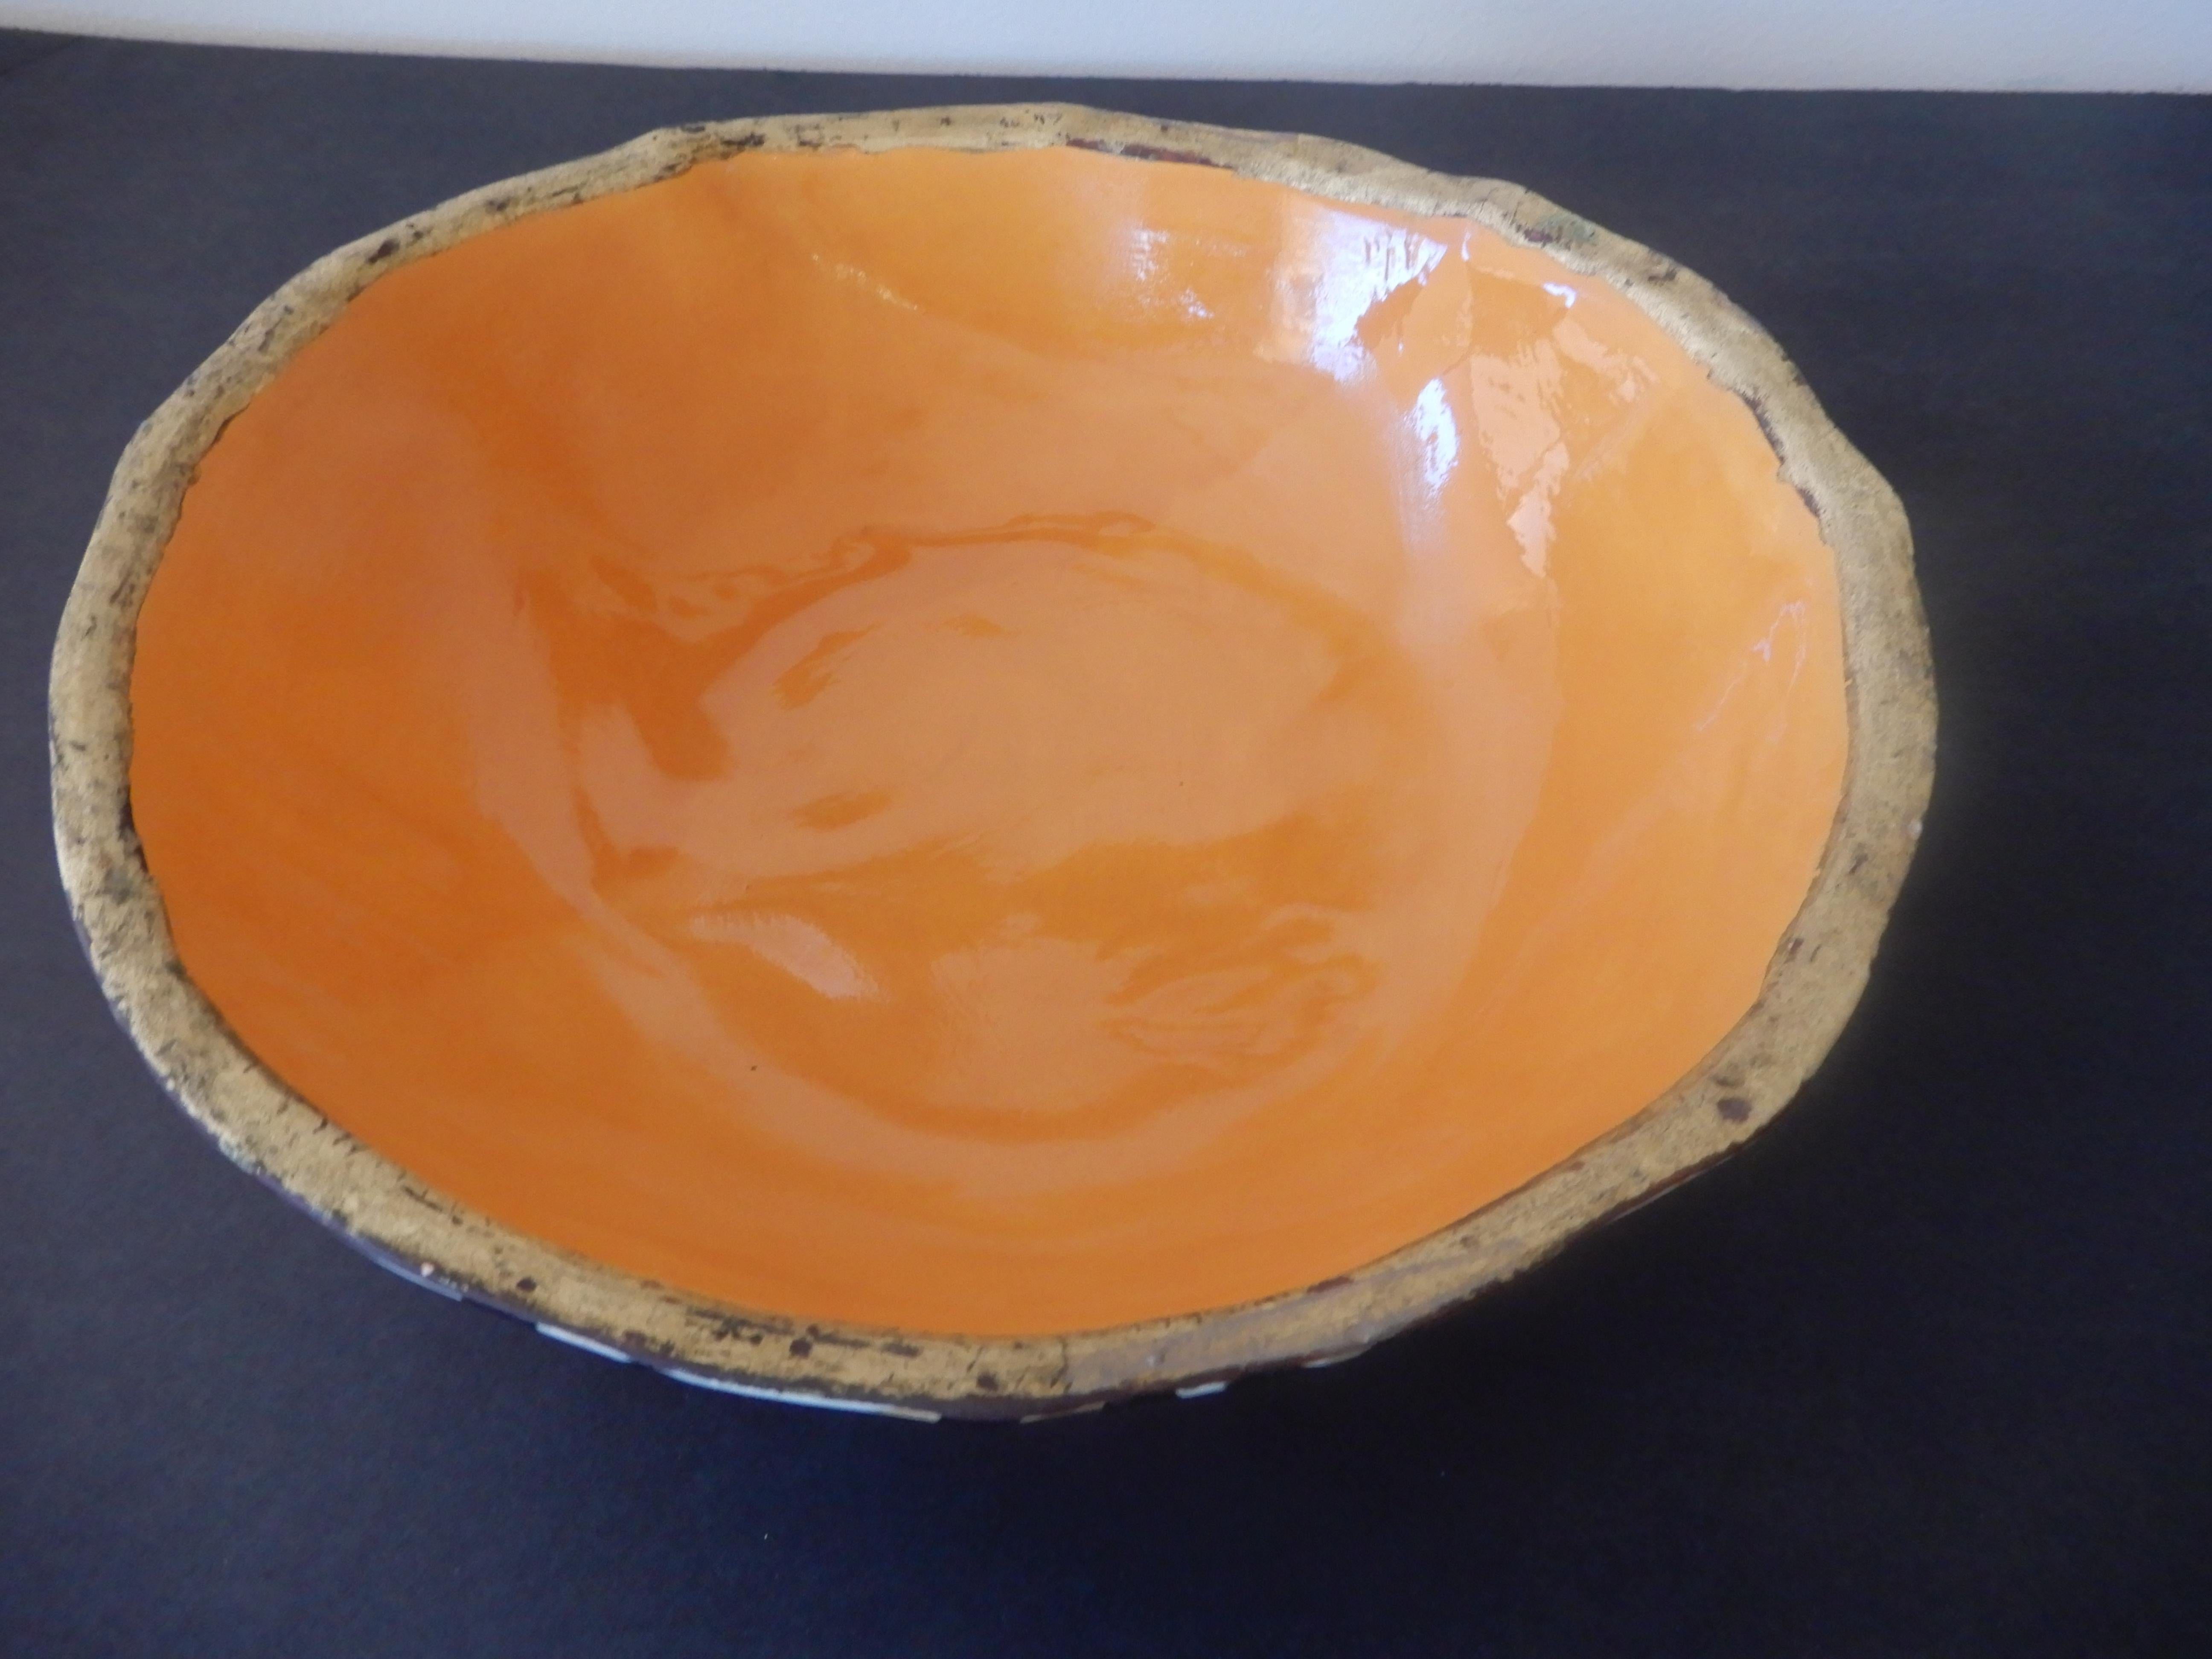 A rare find in this beautifully handcrafted modern artisan bowl by Brenda Holzke. Orange enamel with gold trim, hand painted leopard spots, signed, gorgeous and extremely rare.